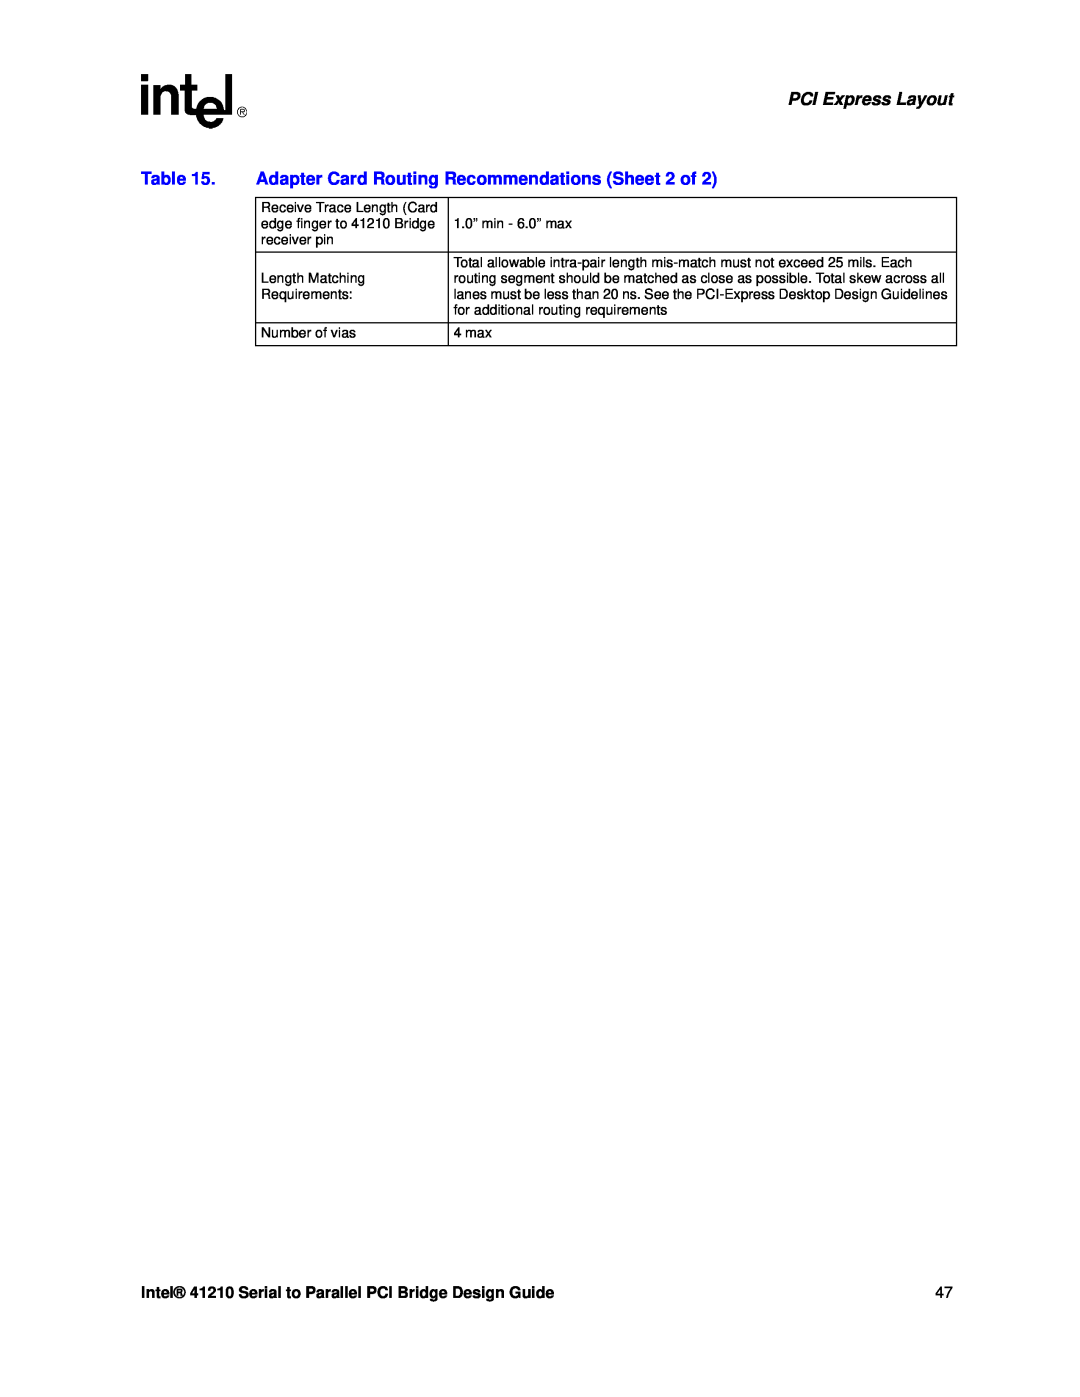 Intel 41210 manual Adapter Card Routing Recommendations Sheet 2 of, PCI Express Layout 